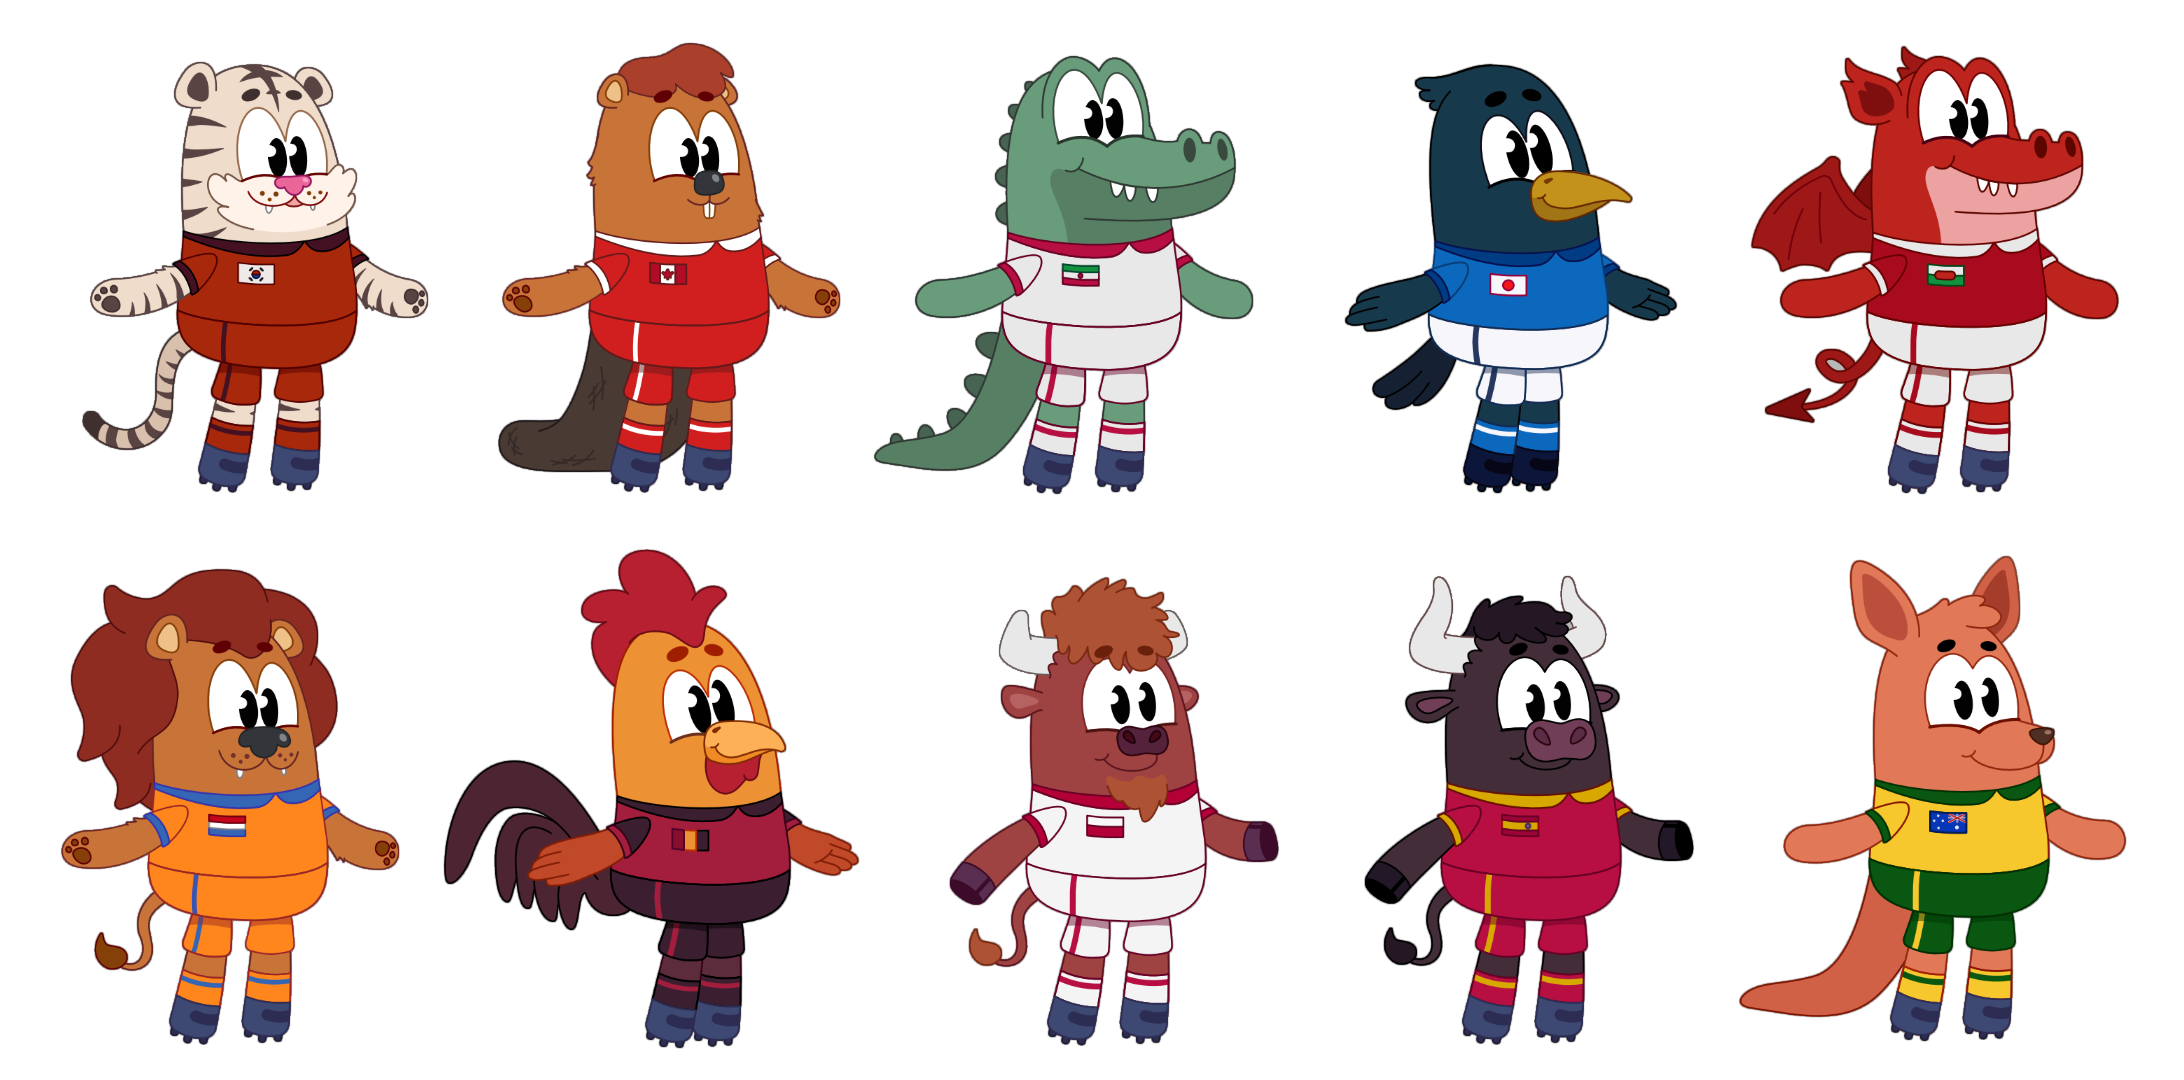 Football mascots for several countries in the worldcup, using their national animal